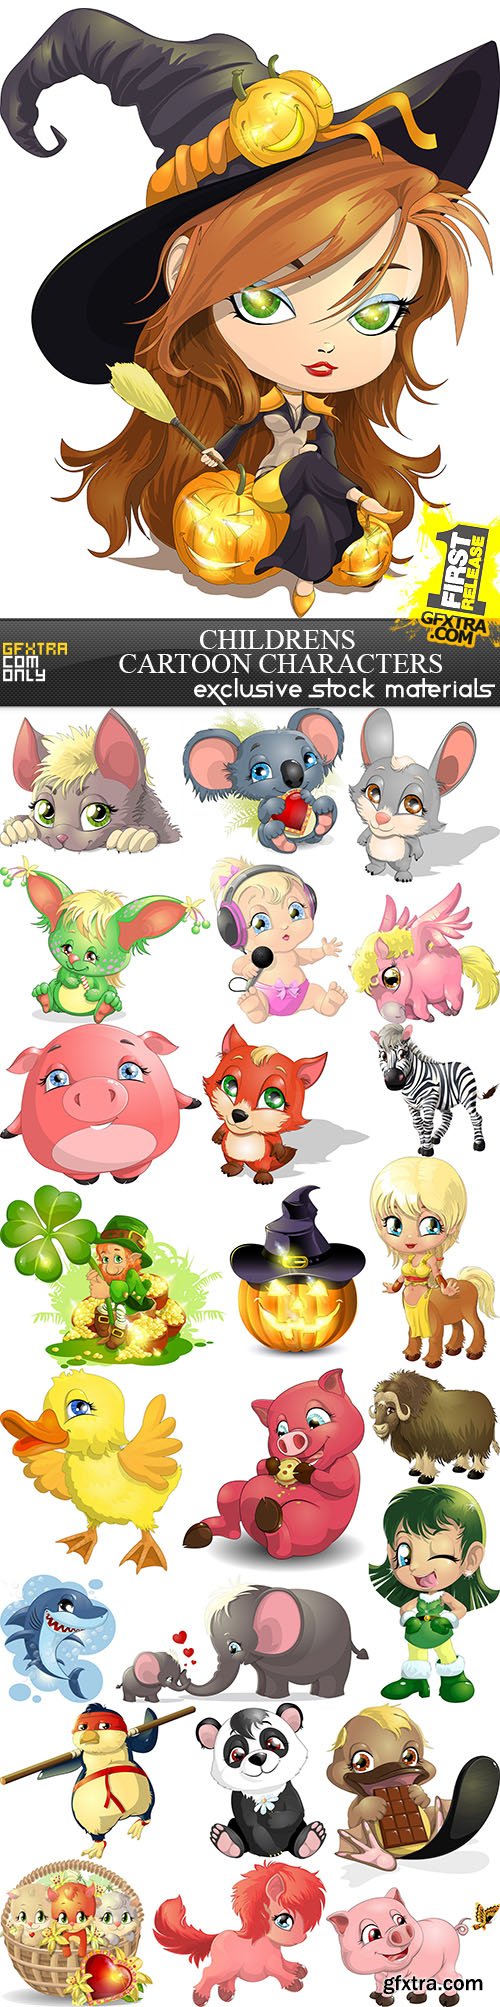 Childrens Cartoon Characters 25xEPS